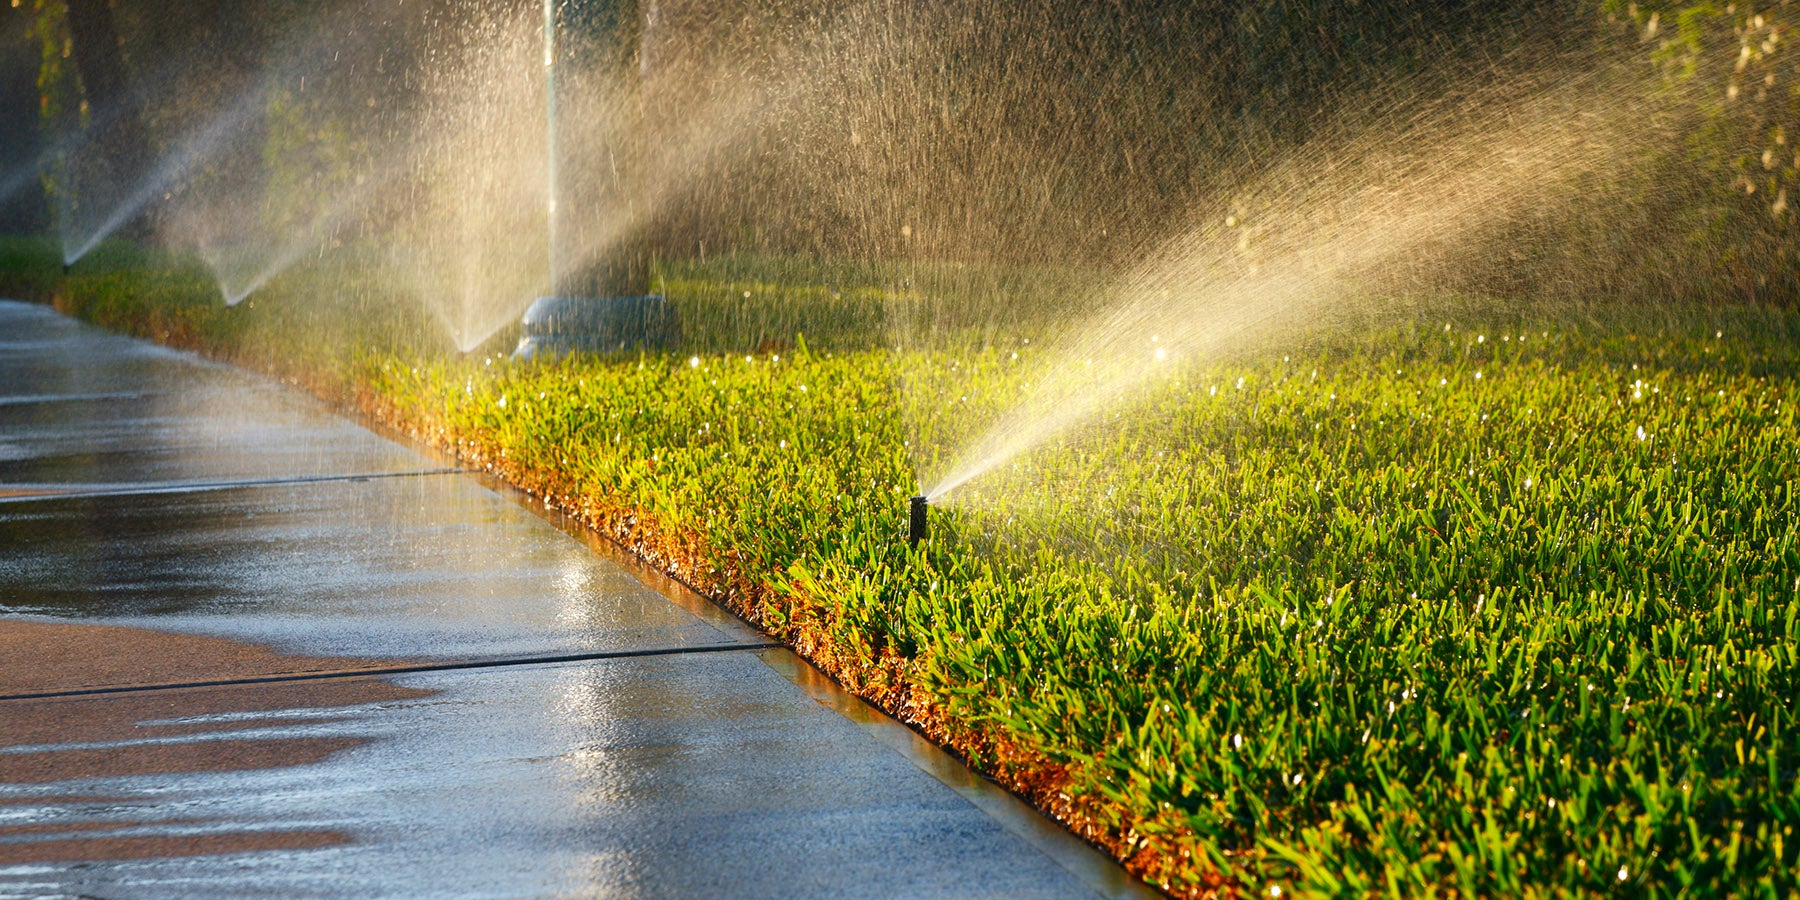 Avoid Overspraying and Overpaying for Water with These Lawn